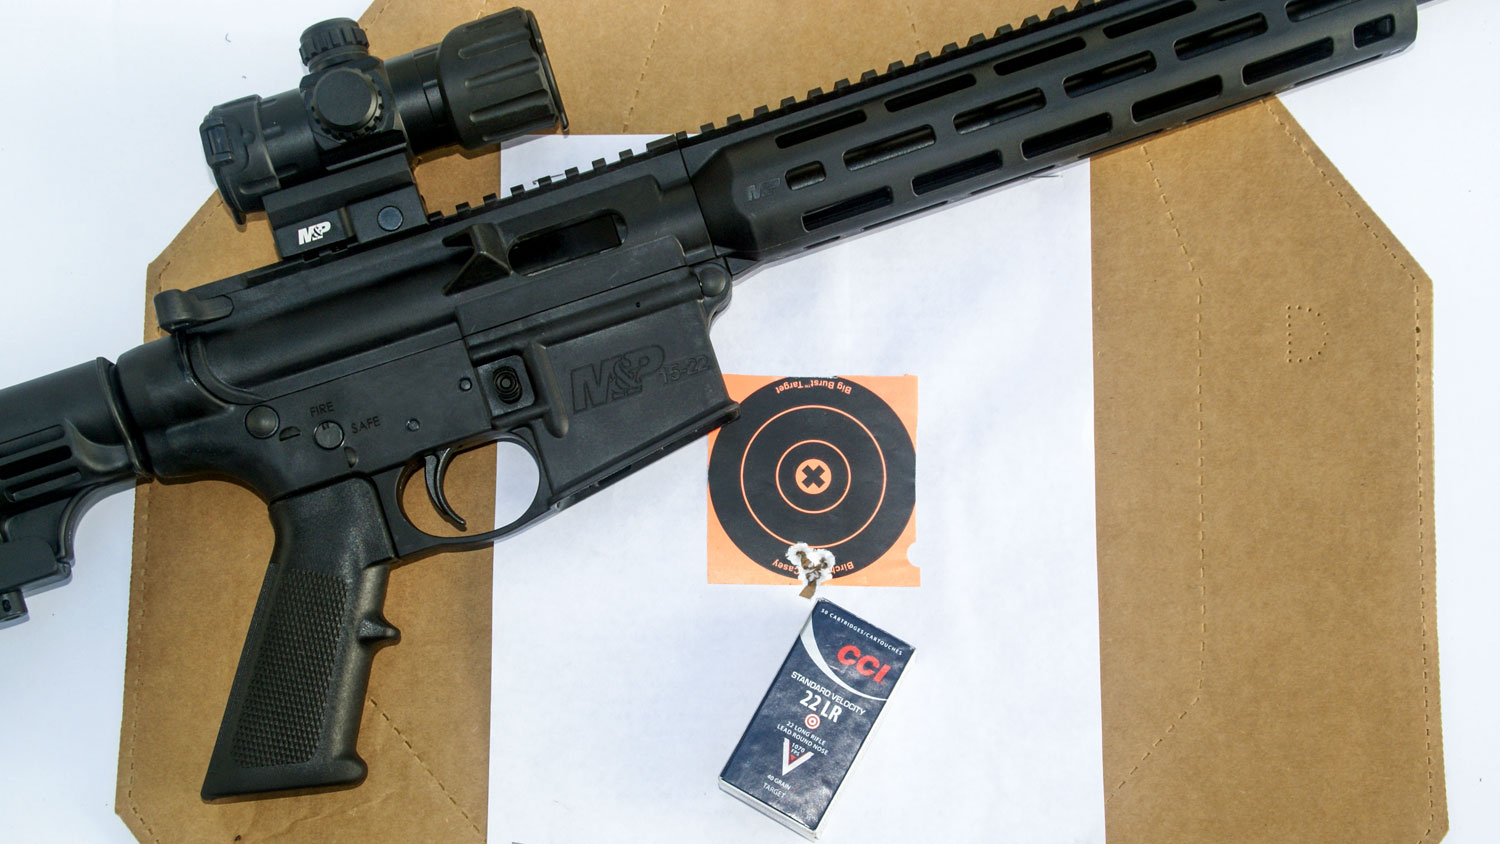 The AR-15 action has proven highly accurate and the M&amp;P 15-22 Sport OR was no exception